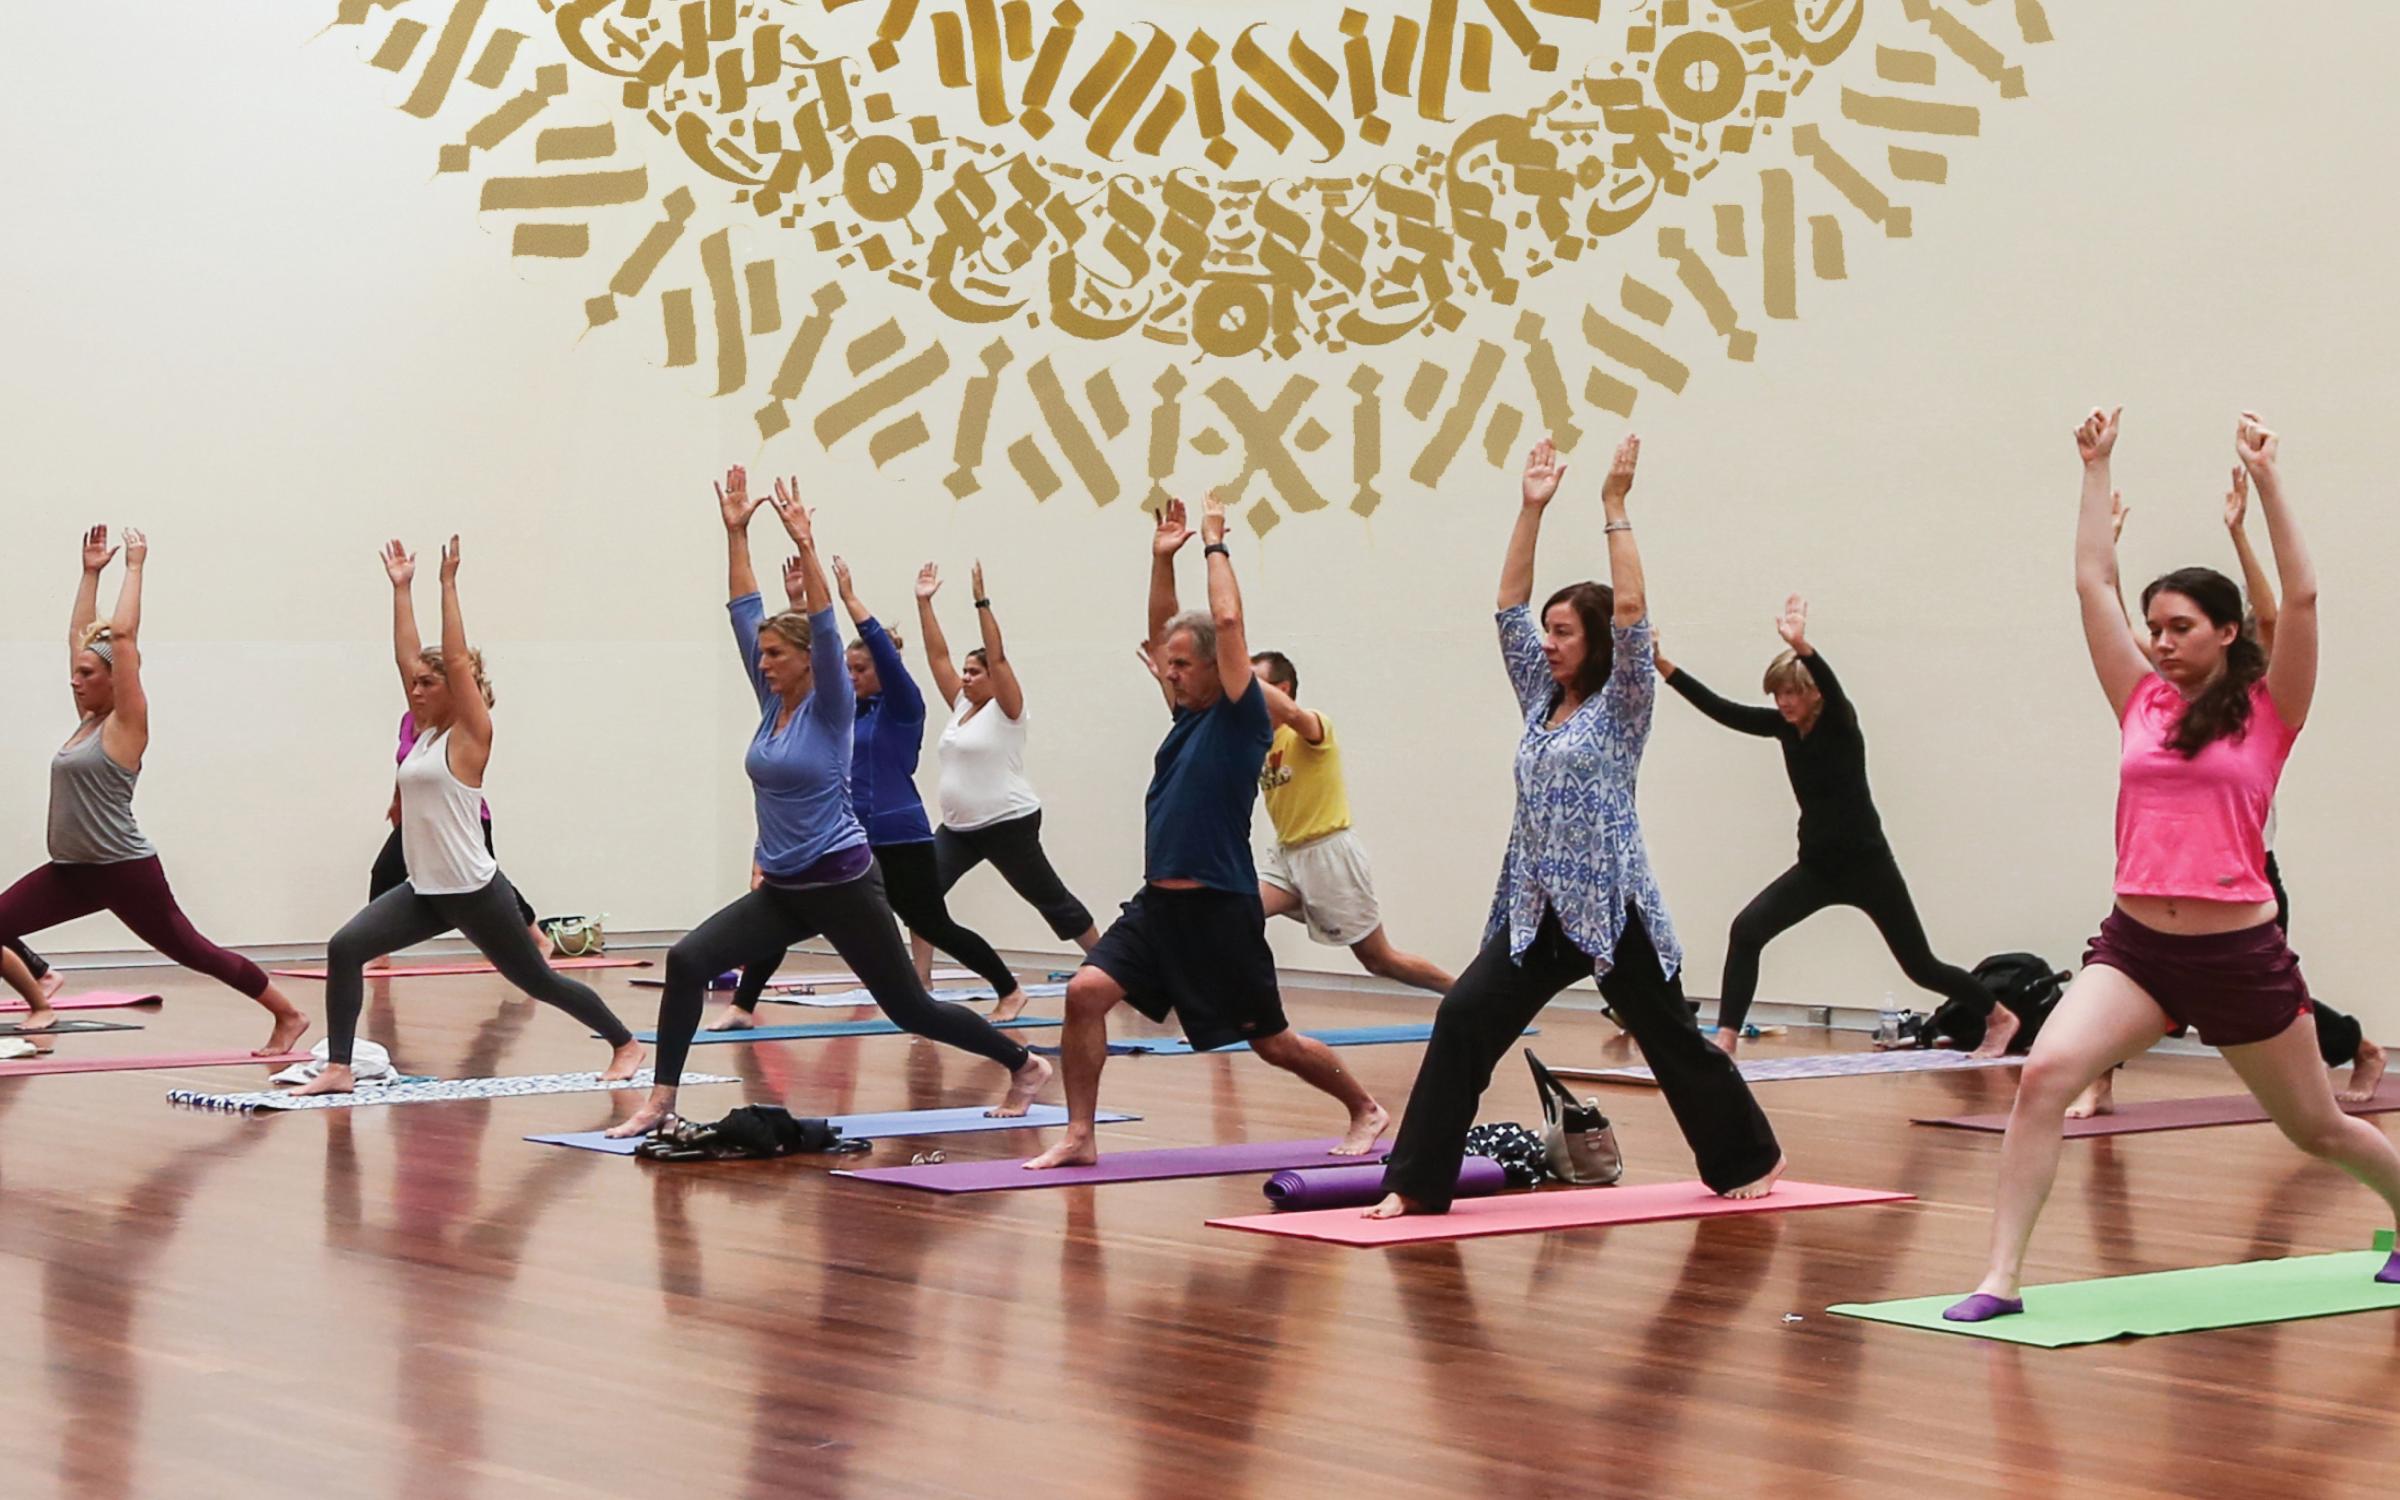 a group of people doing yoga on a brown wood floor